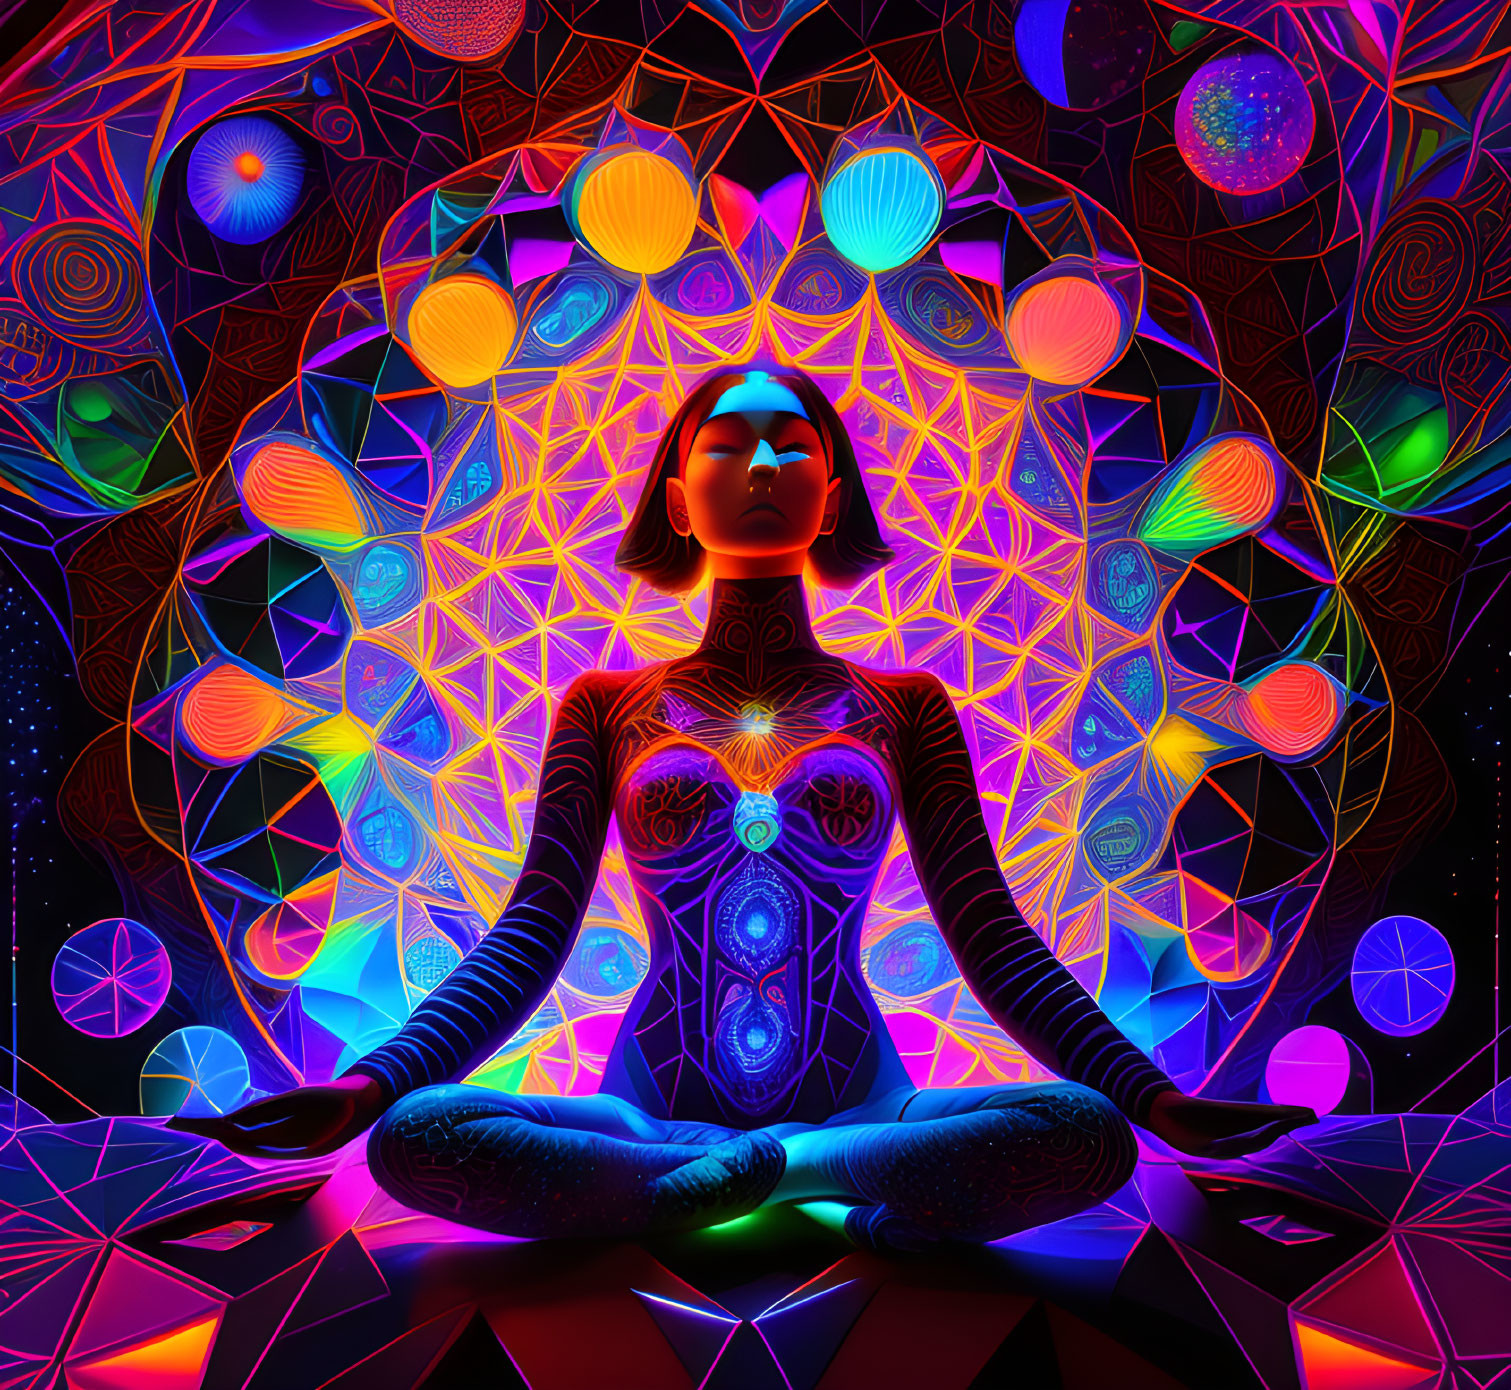 Colorful Digital Artwork: Woman Meditating with Psychedelic Patterns